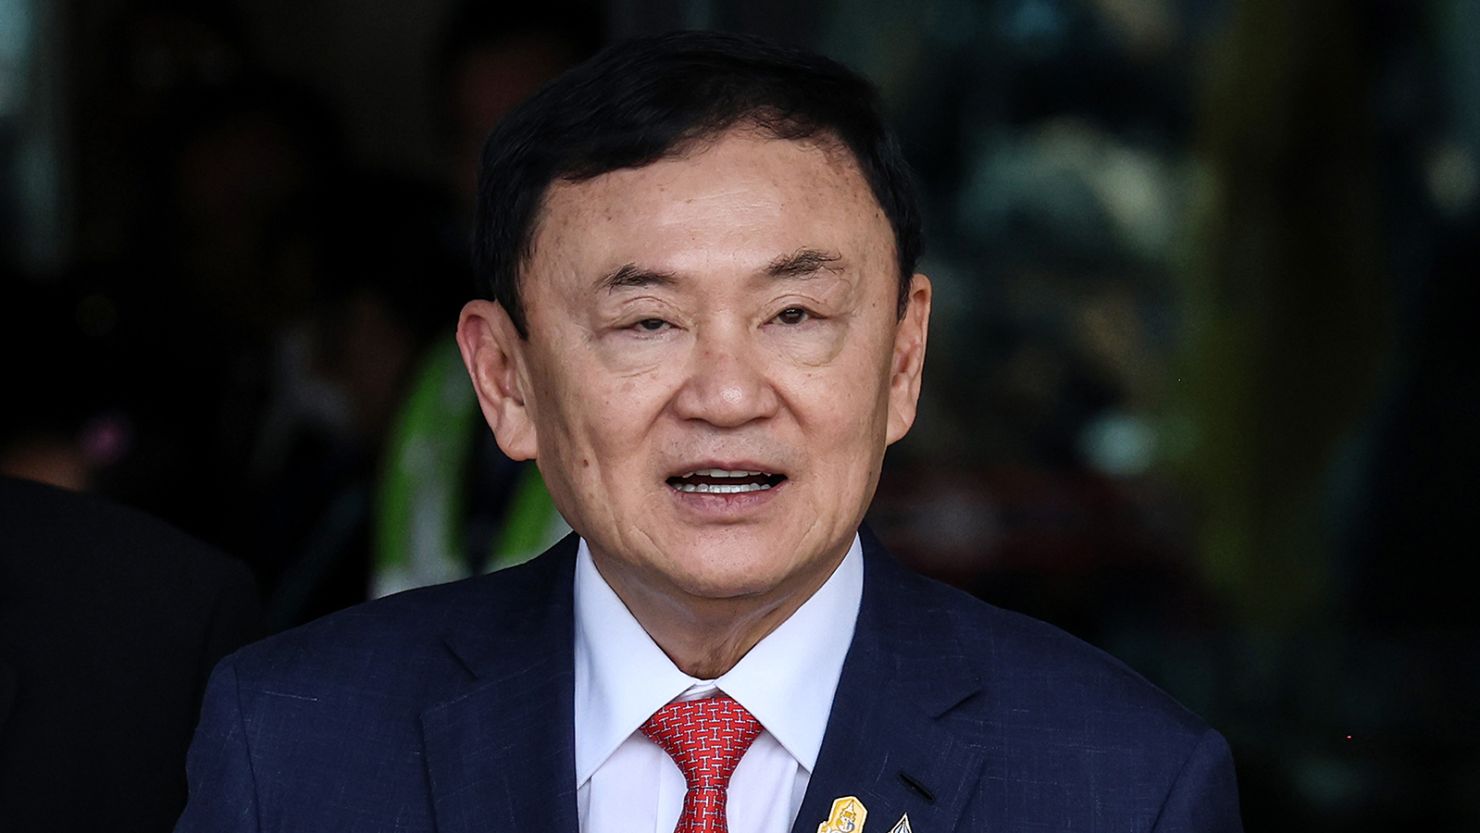 Thaksin Shinawatra, Thailand's former prime minister, arrives at Don Mueang airport after returning from self-exile in Bangkok, Thailand, on August 22, 2023.